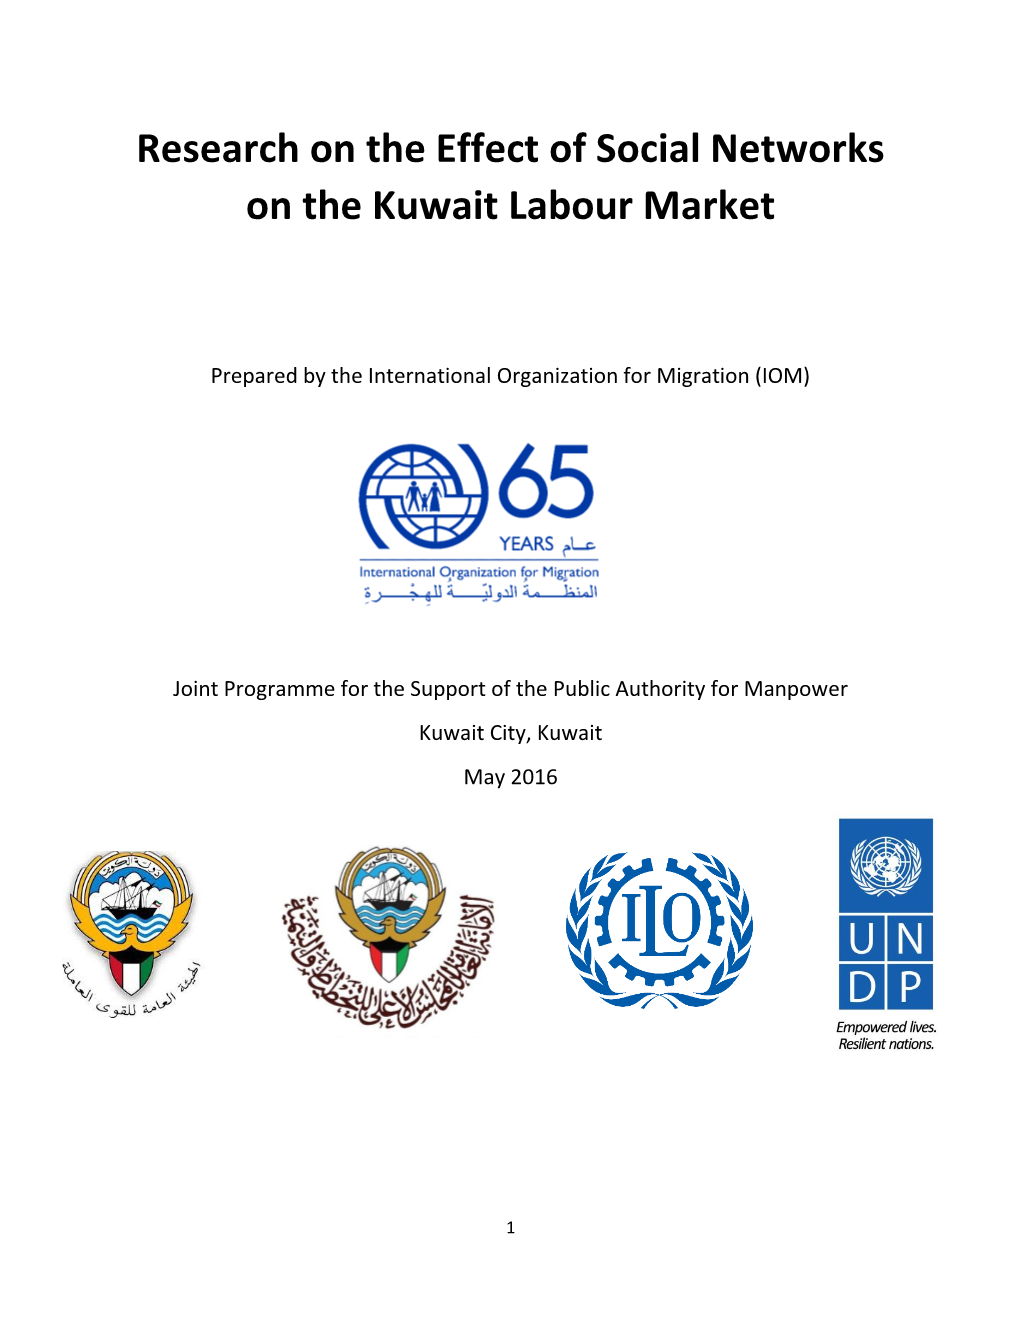 Research on the Effect of Social Networks on the Kuwait Labour Market